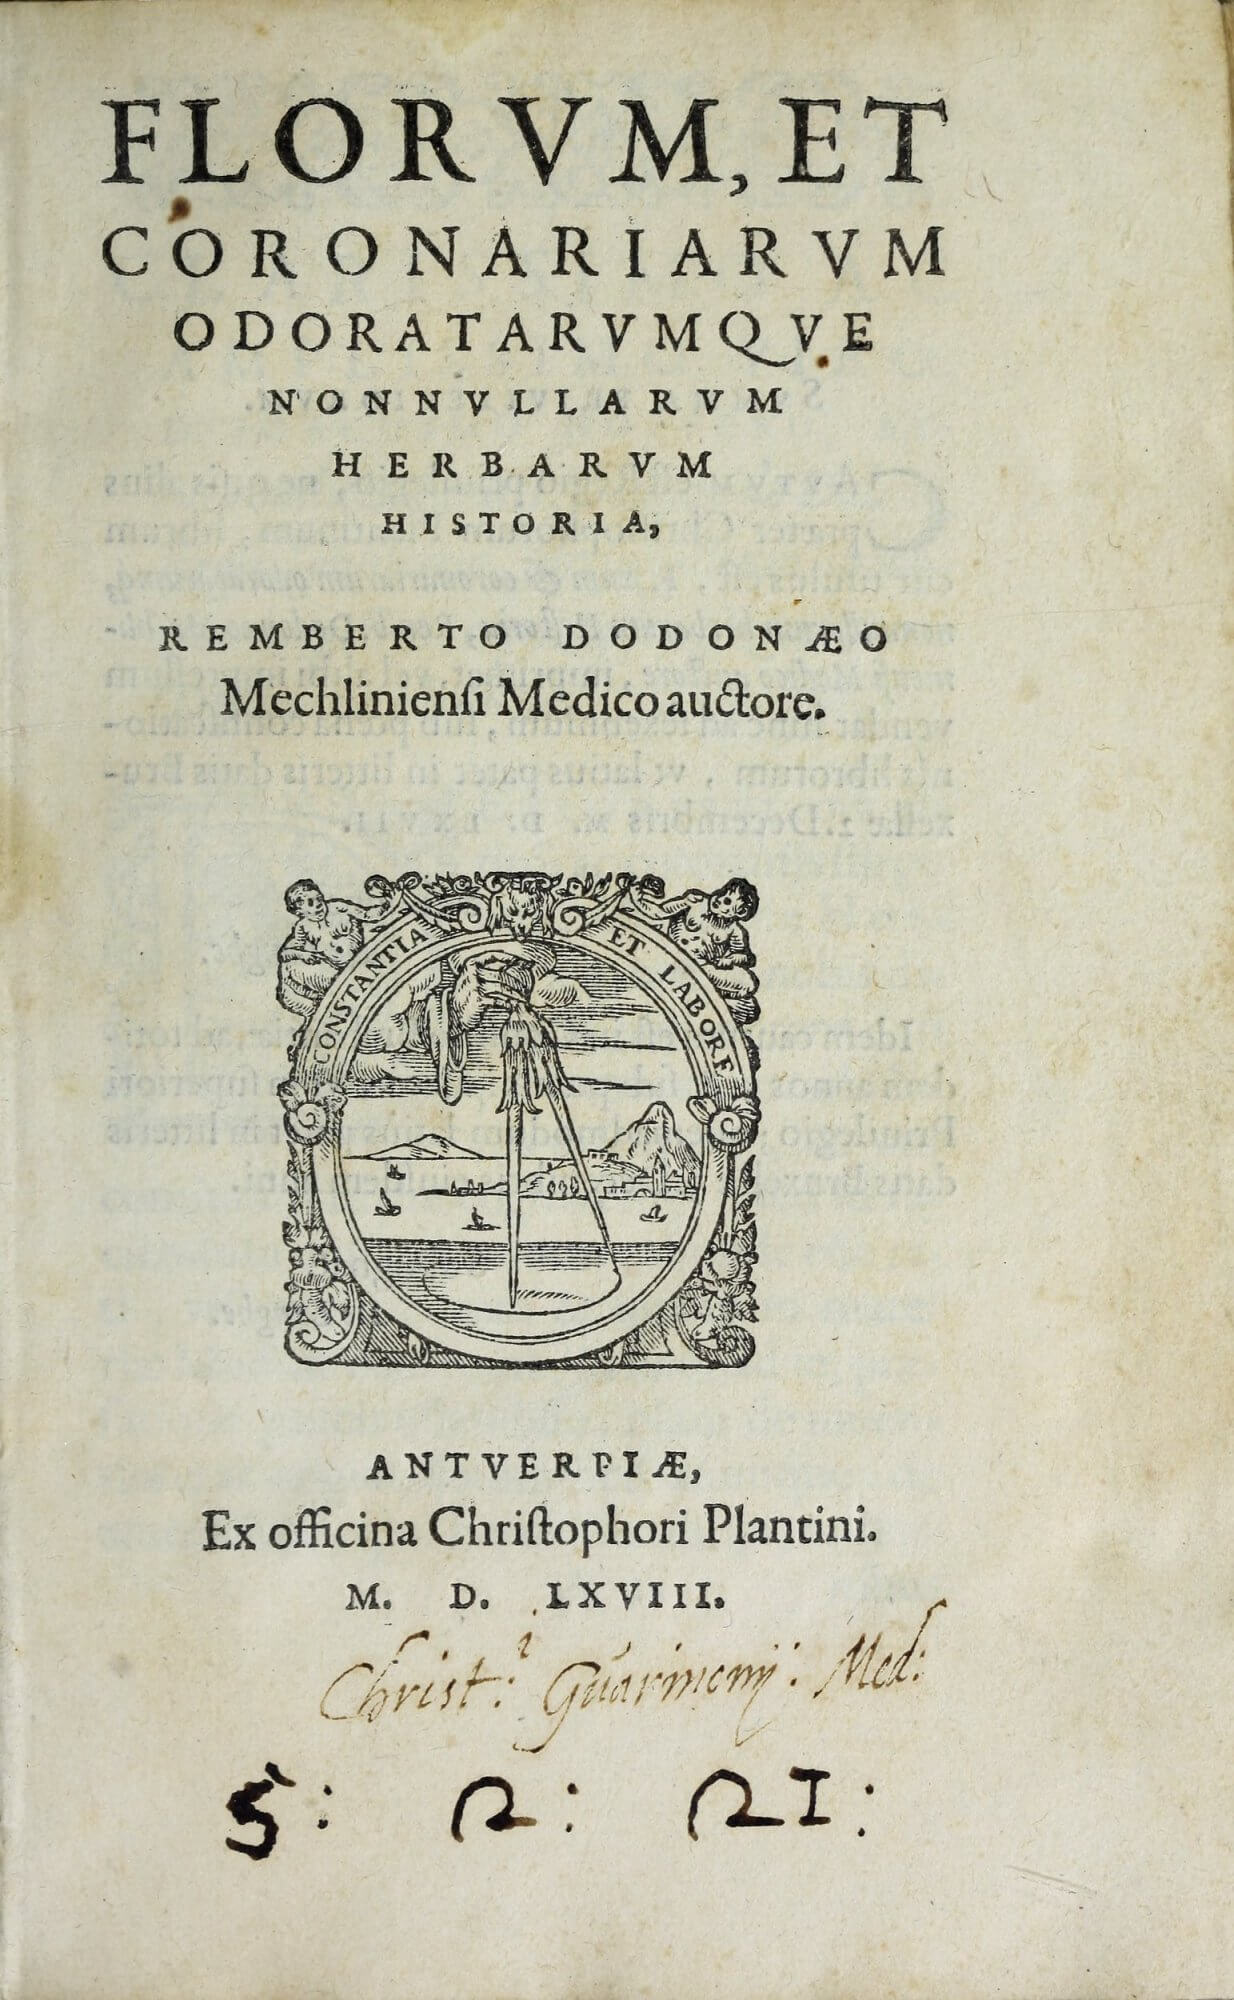 Christopher Plantin's printer's device illustrates his motto, "Constantia et Labore" ("Perseverance and Work") with a compass, the fixed point of which represents the constancy of perseverance and the outer point representing labor.